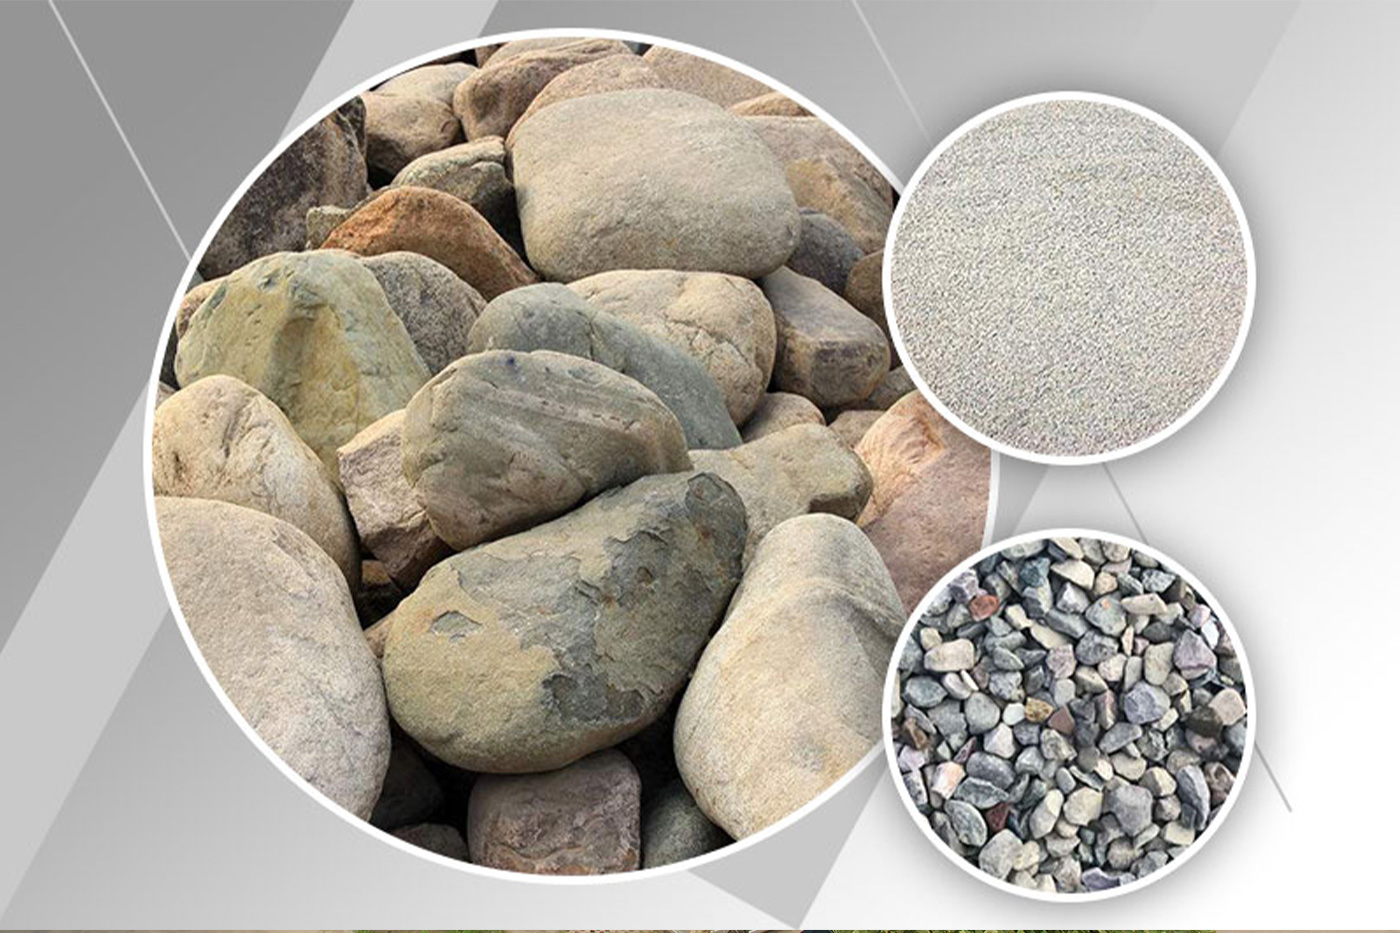 What are the machines that break stones into sand?